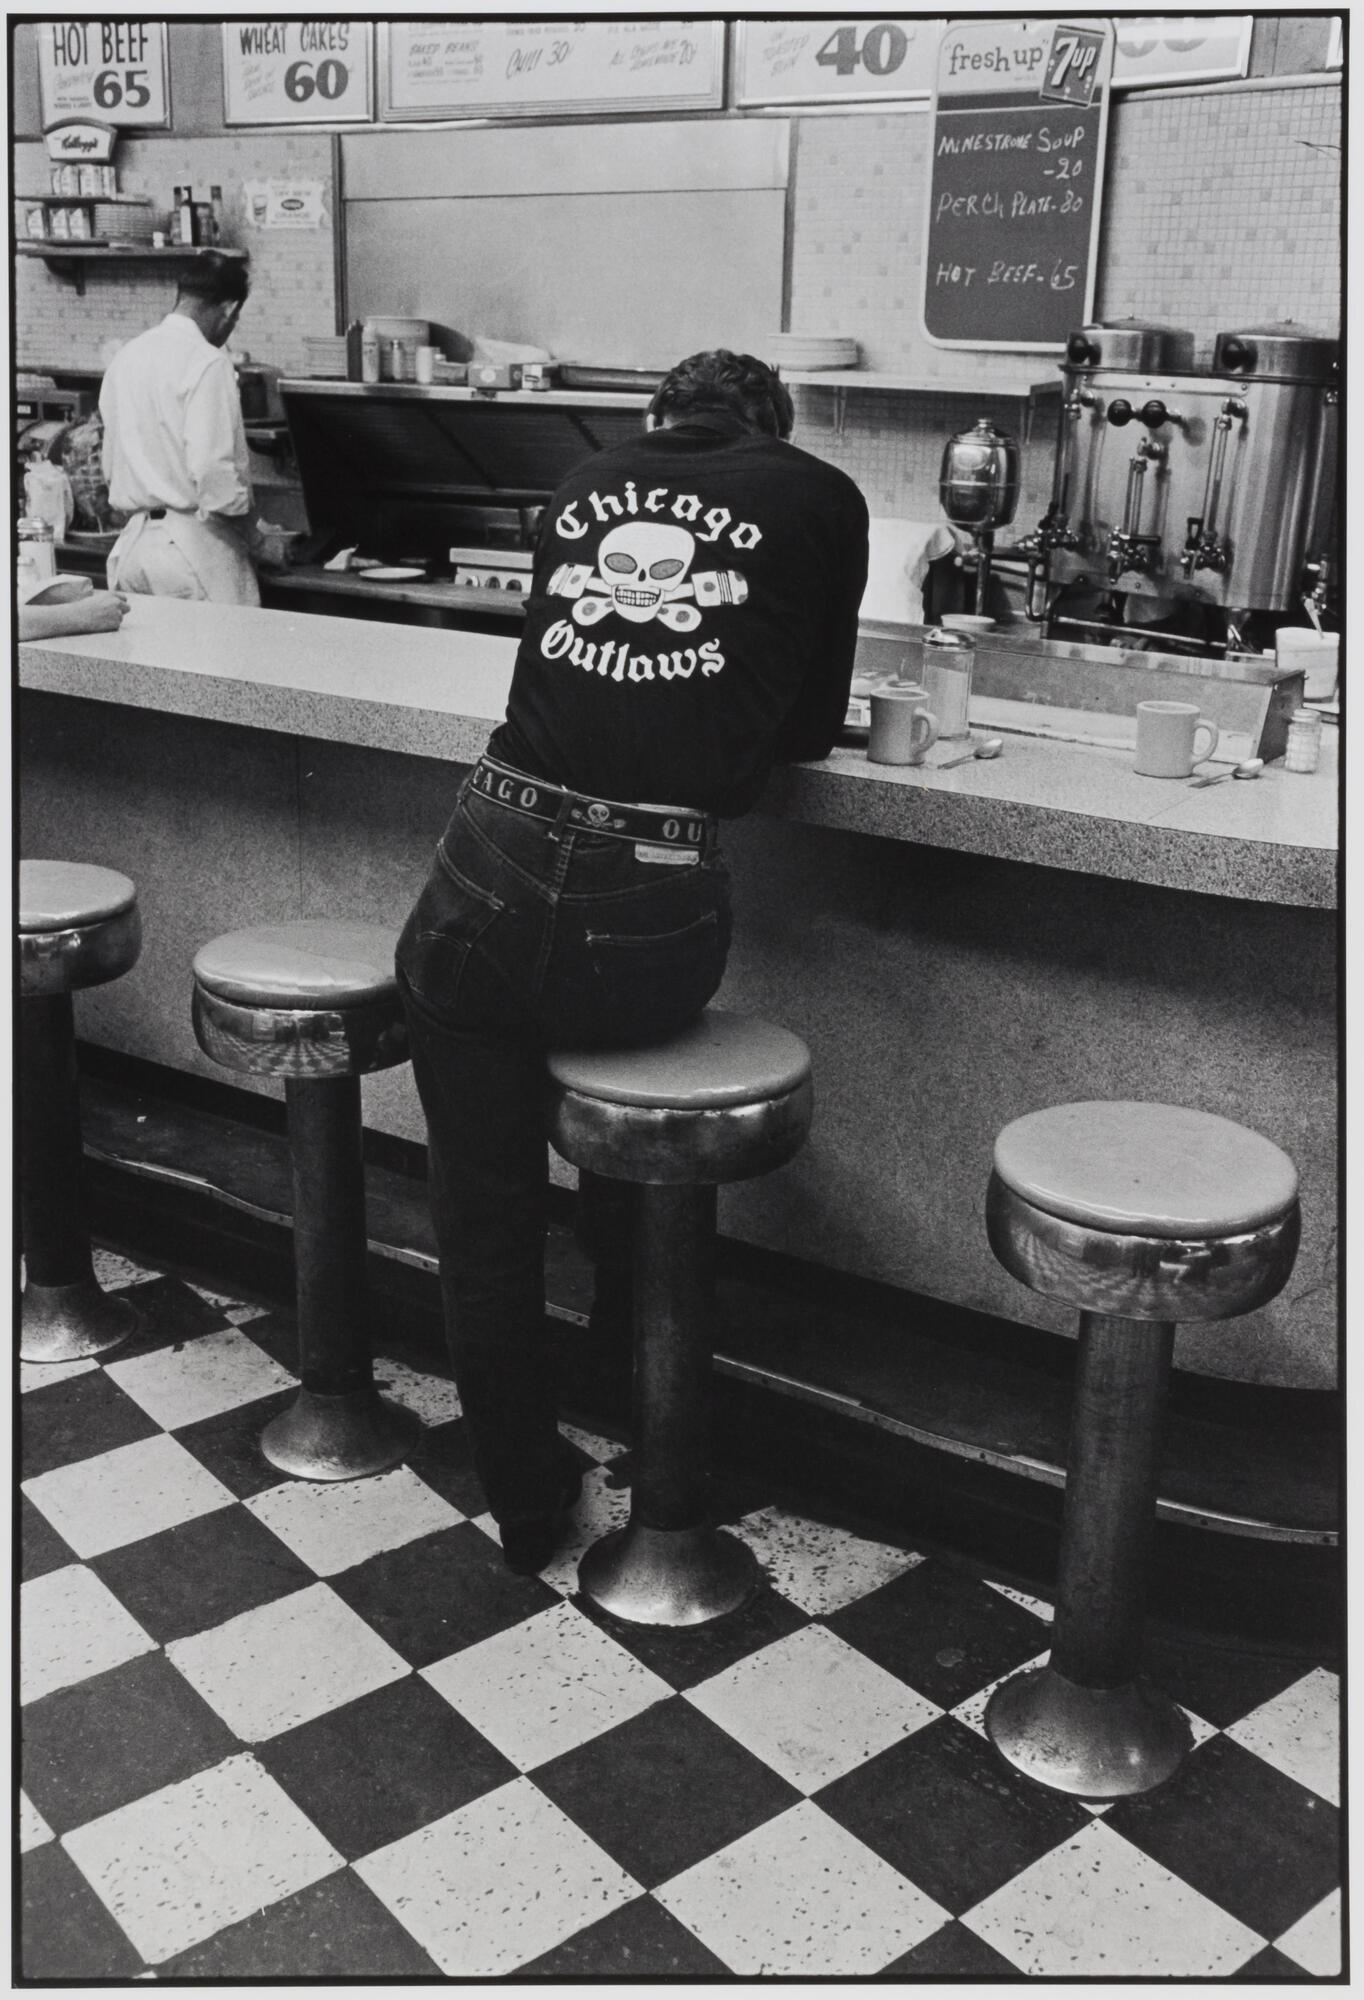 A photograph of a man sitting on a circular stool in a diner, his back turned to the camera, revealing a shirt, which reads "Chicago Outlaws." Behind the counter, a man prepares orders. 